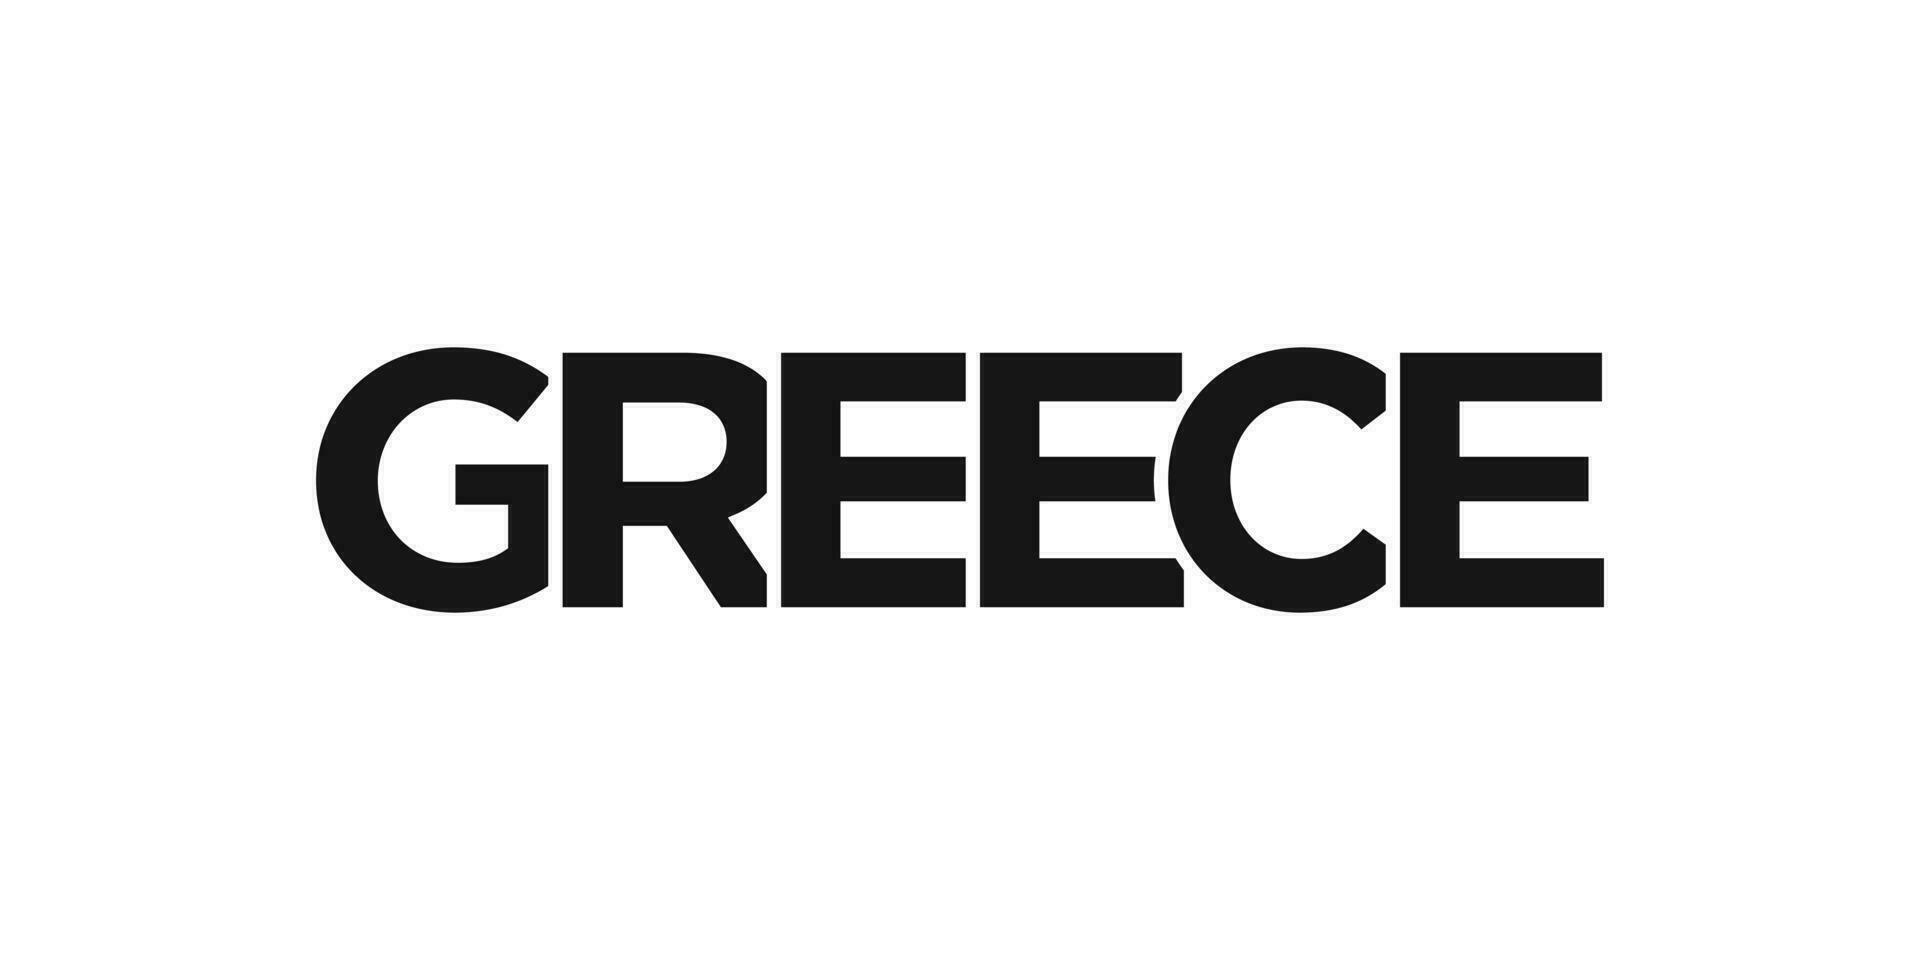 Greece emblem. The design features a geometric style, vector illustration with bold typography in a modern font. The graphic slogan lettering.